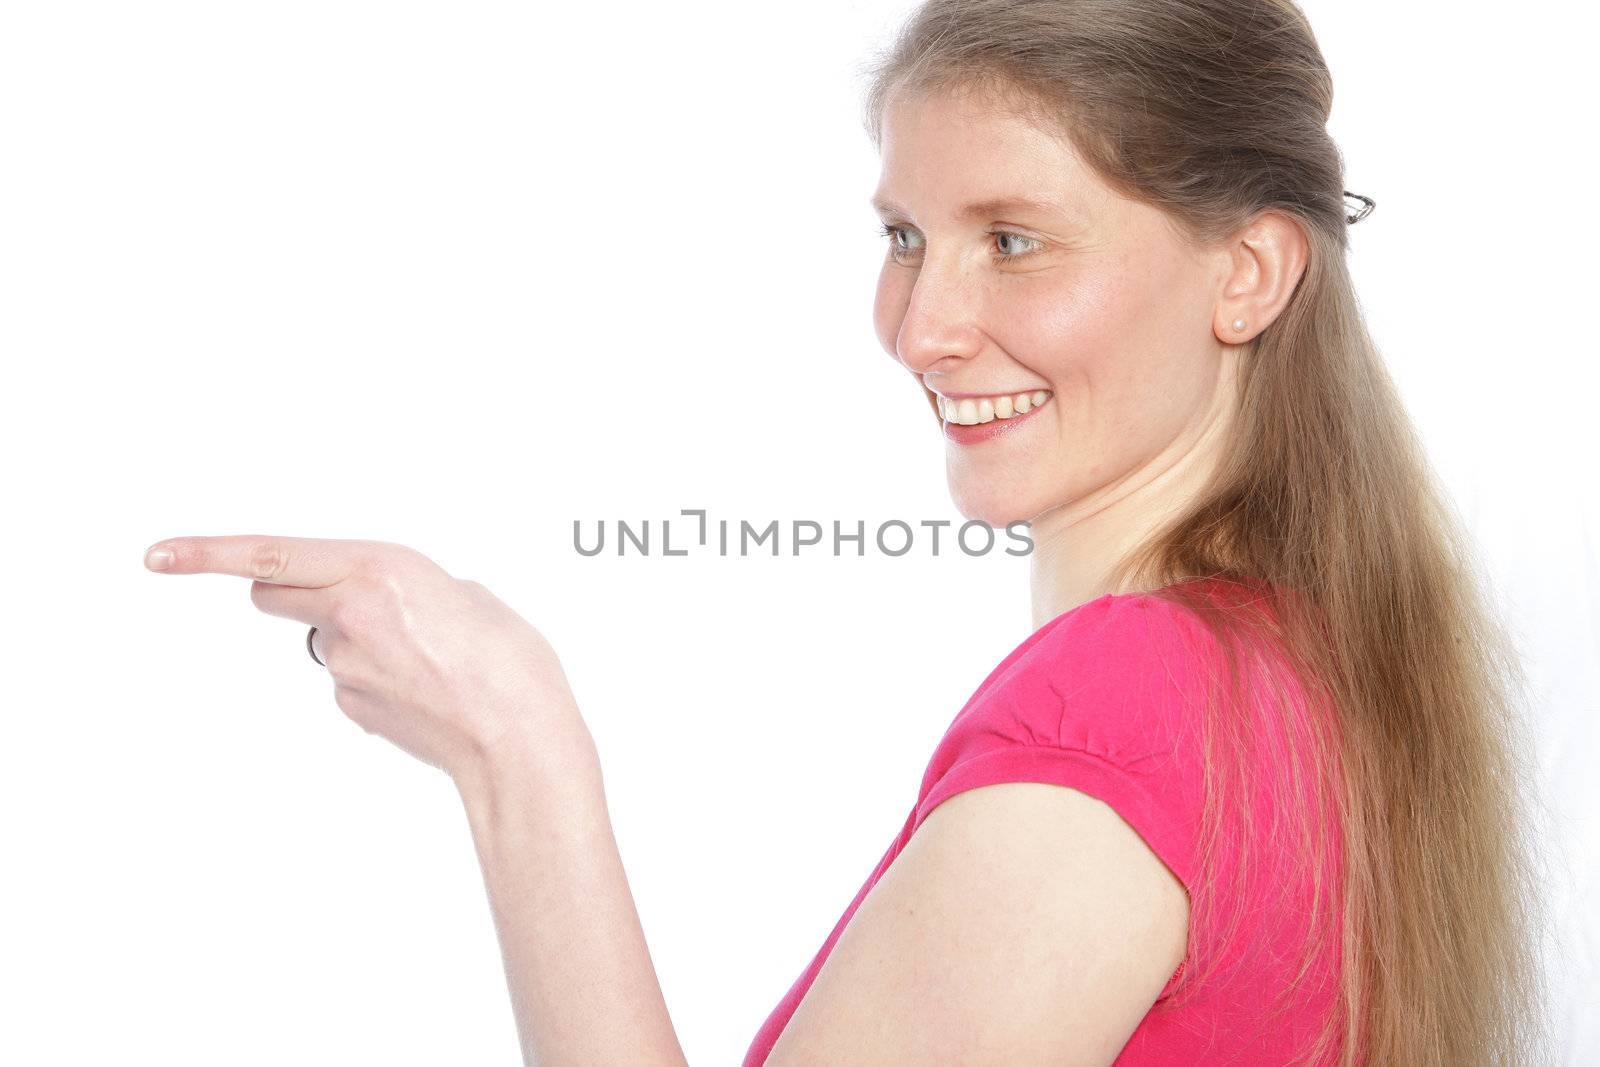 Smiling attractive middle-aged woman with long blond hair standing sideways pointing with her finger to the left of the frame isolated on white